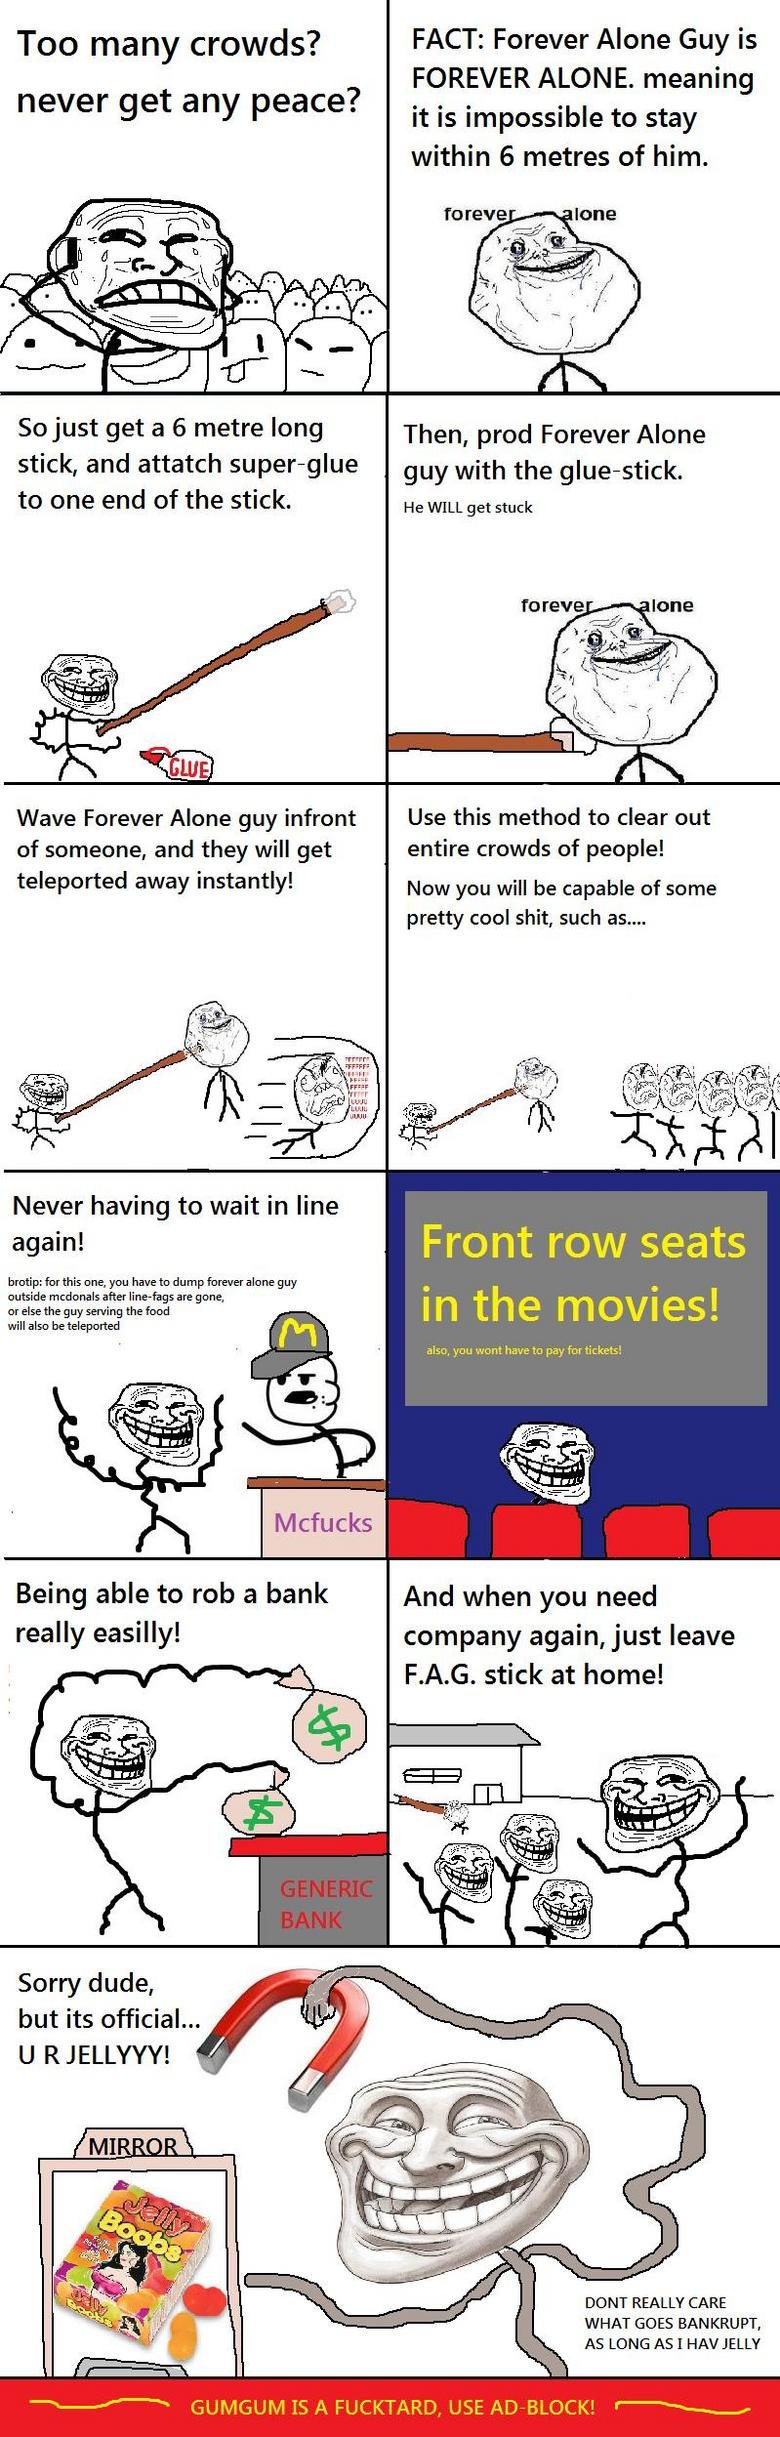 troll physics. from&lt;br /&gt; &lt;a href=&quot; target=_blank&gt;trollscience.com/&lt;/a&gt;. Too many crowds? FACT: Forever Alone Guy is FOREVER ALONE. meani